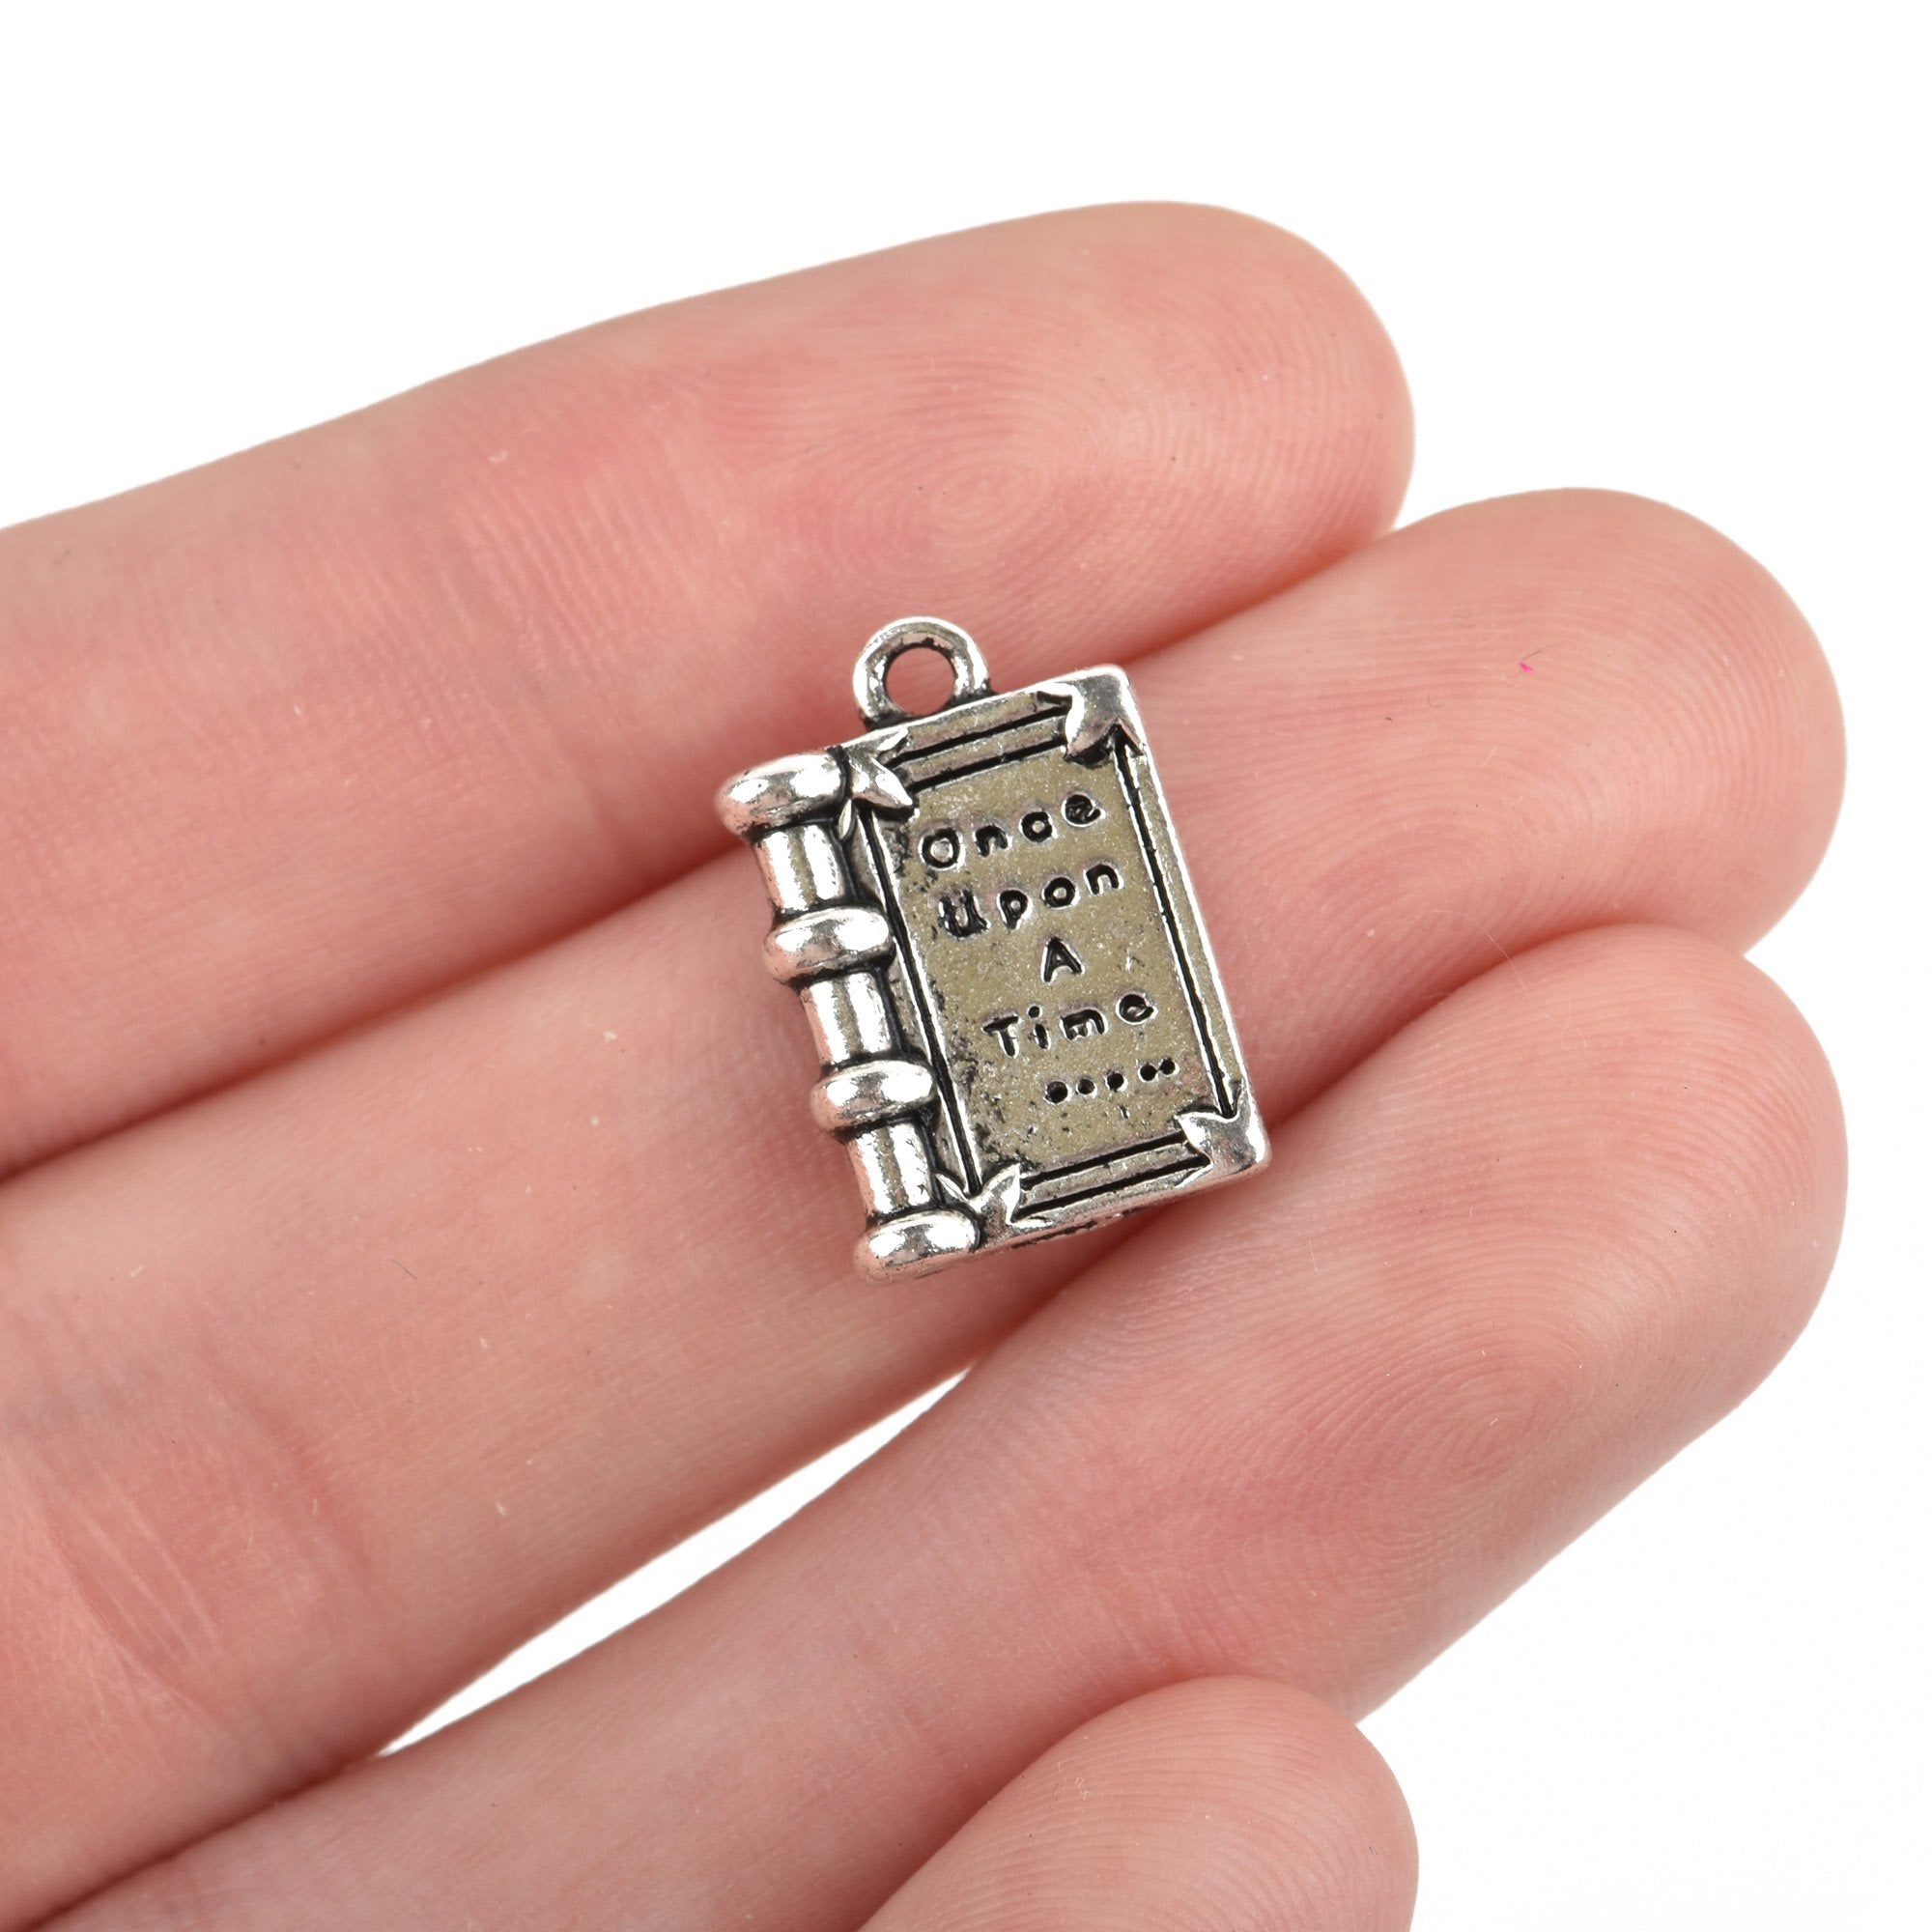 5 Book Charms, Blue Enamel with Gold Plate, 25mm, chs7539